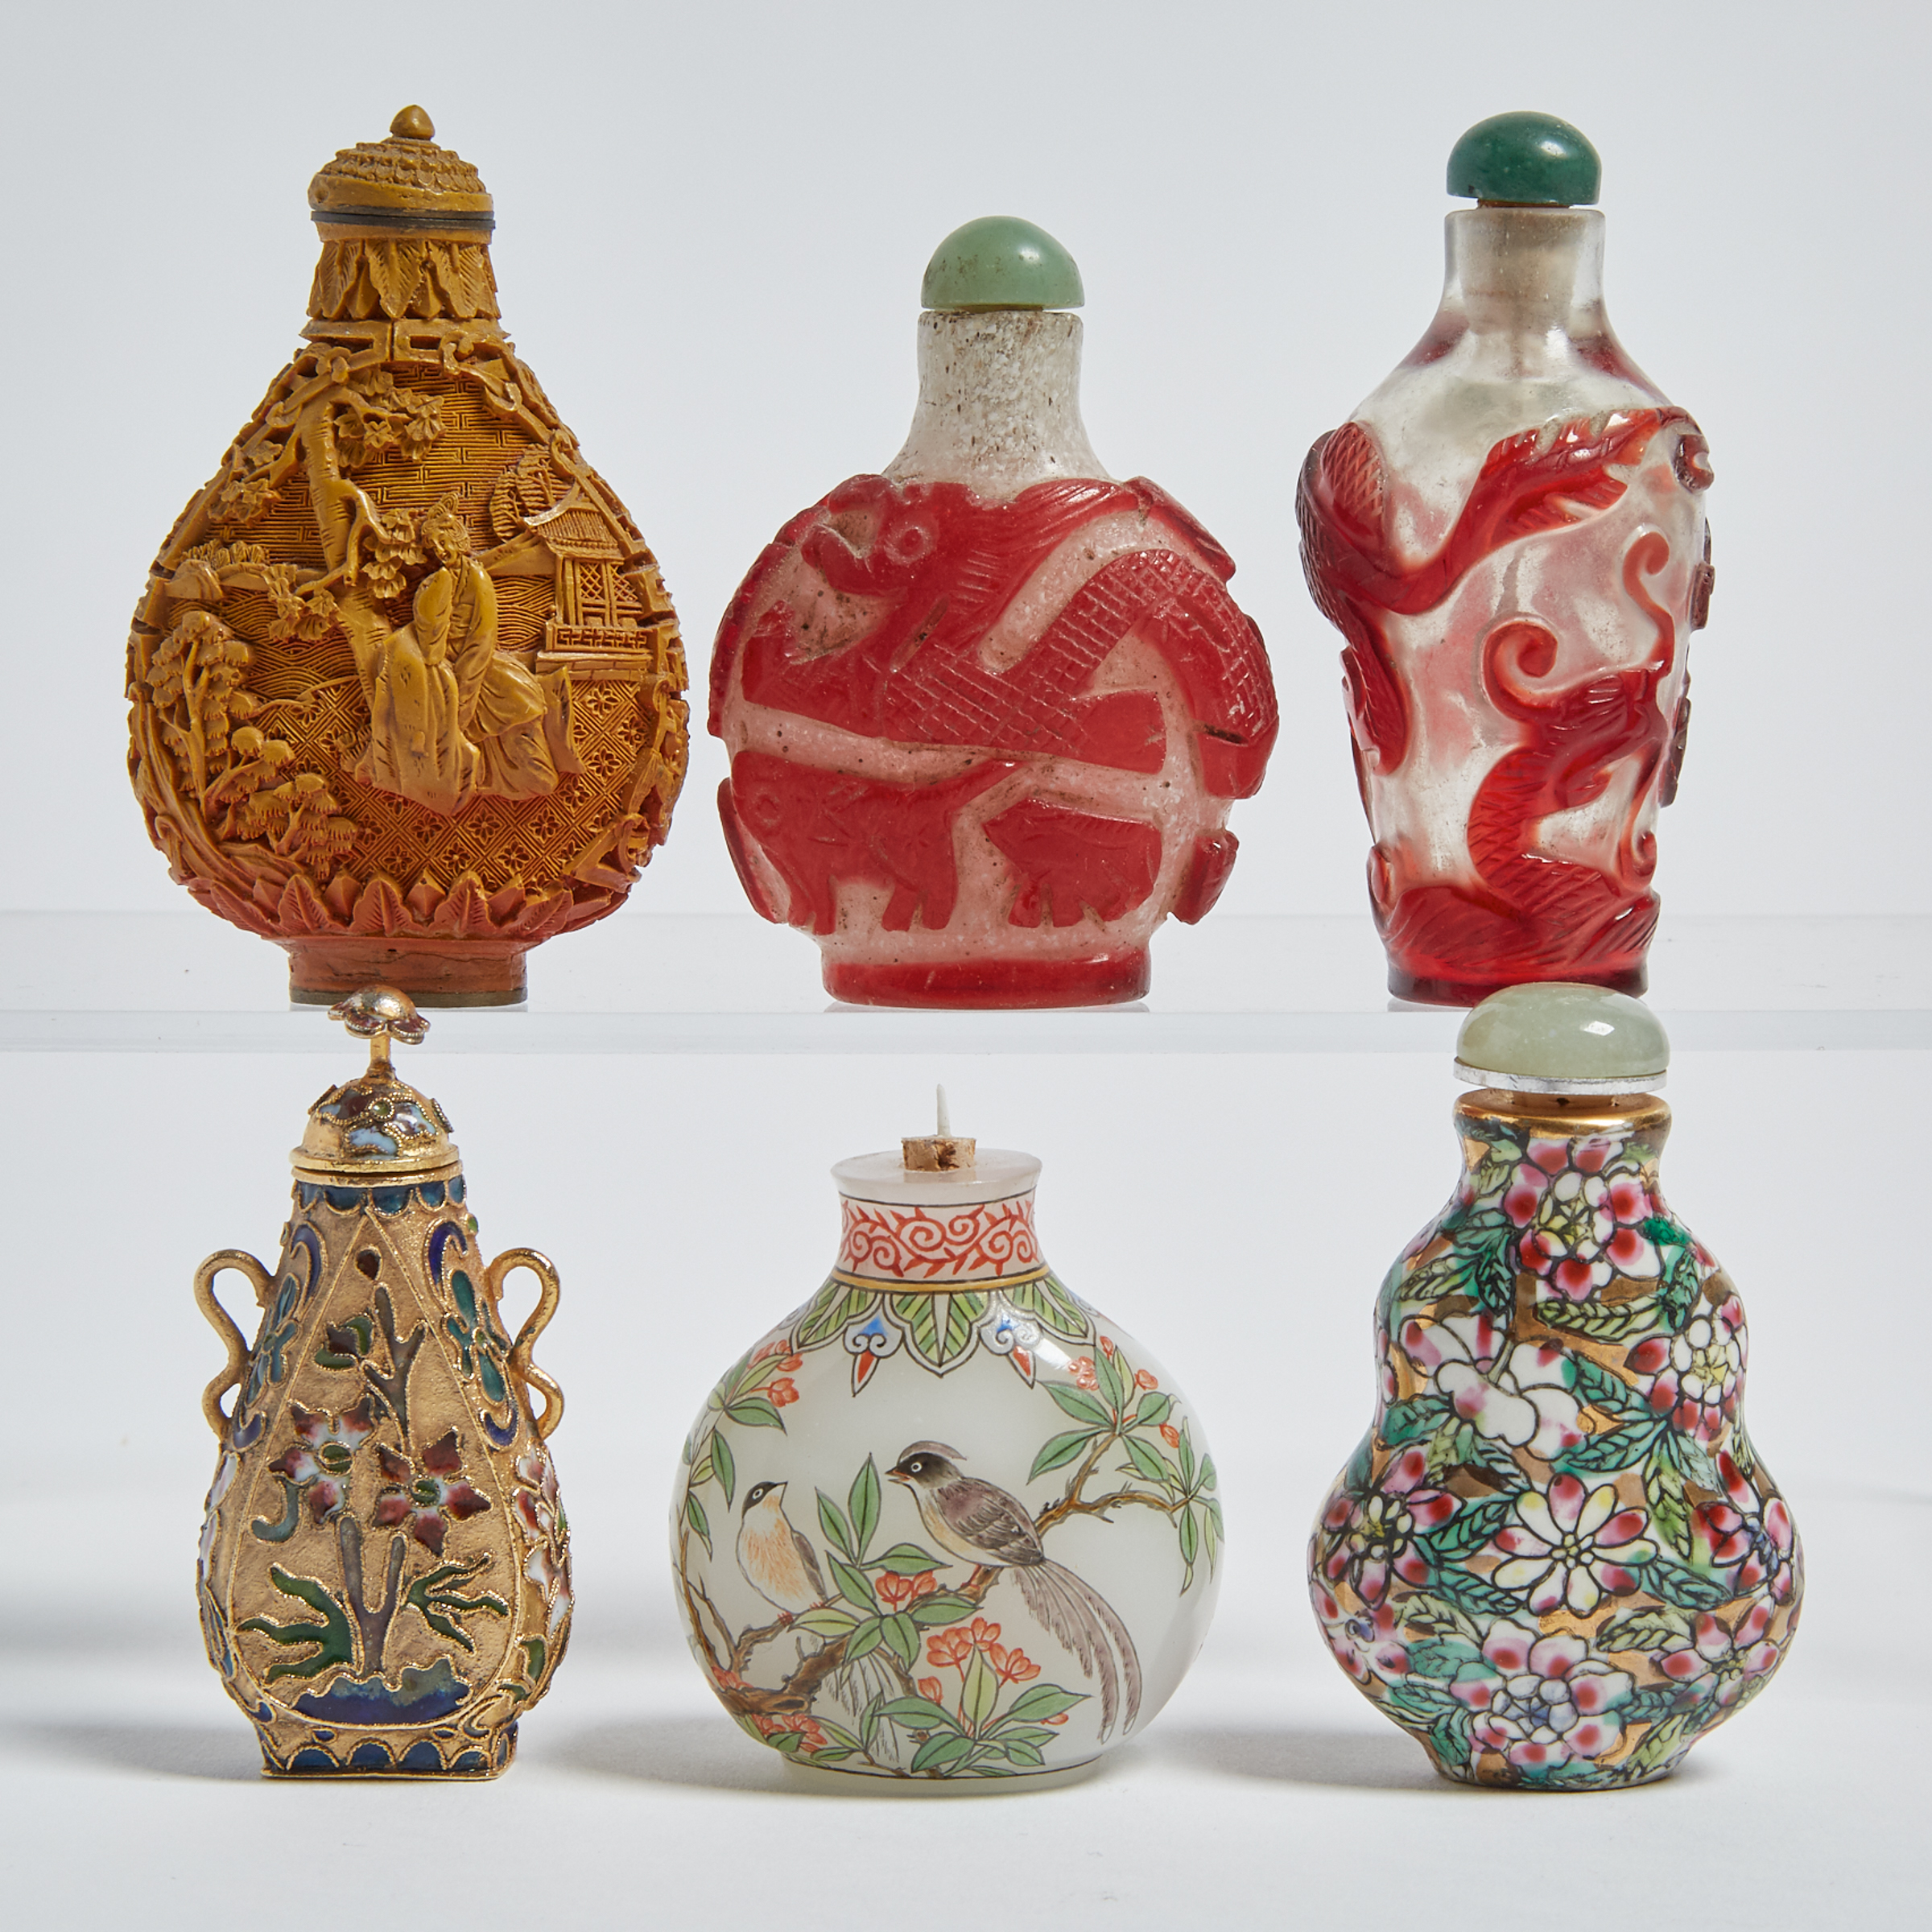 A Group of Six Miscellaneous Snuff Bottles, 19th/20th Century